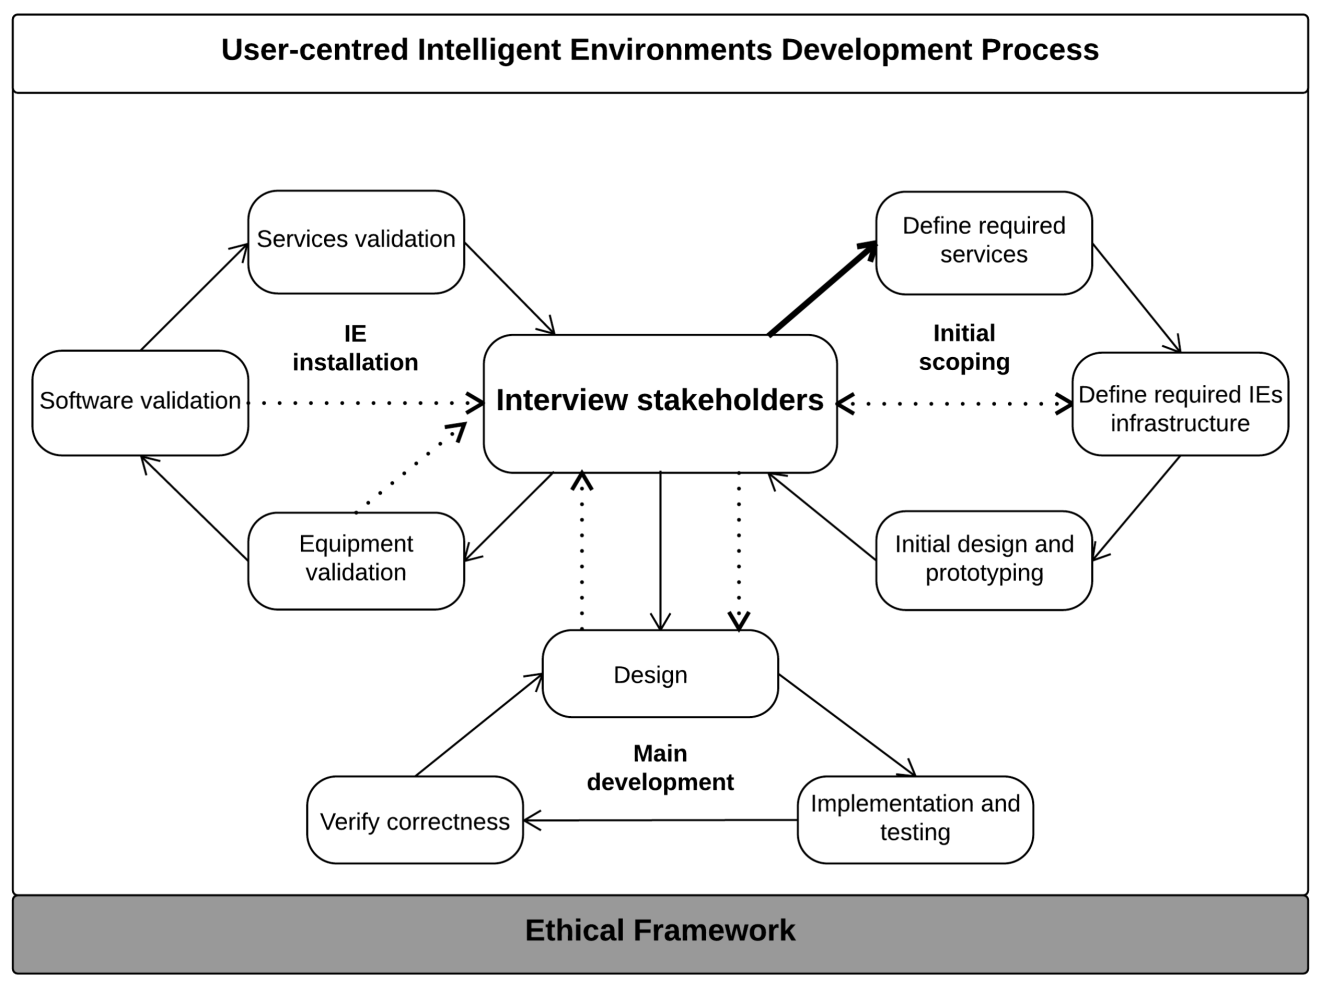 d:\juan\_goodies - research group on the development of intelligent environments\_technical areas\u-c ie development process\universal access journal\uciedp.png